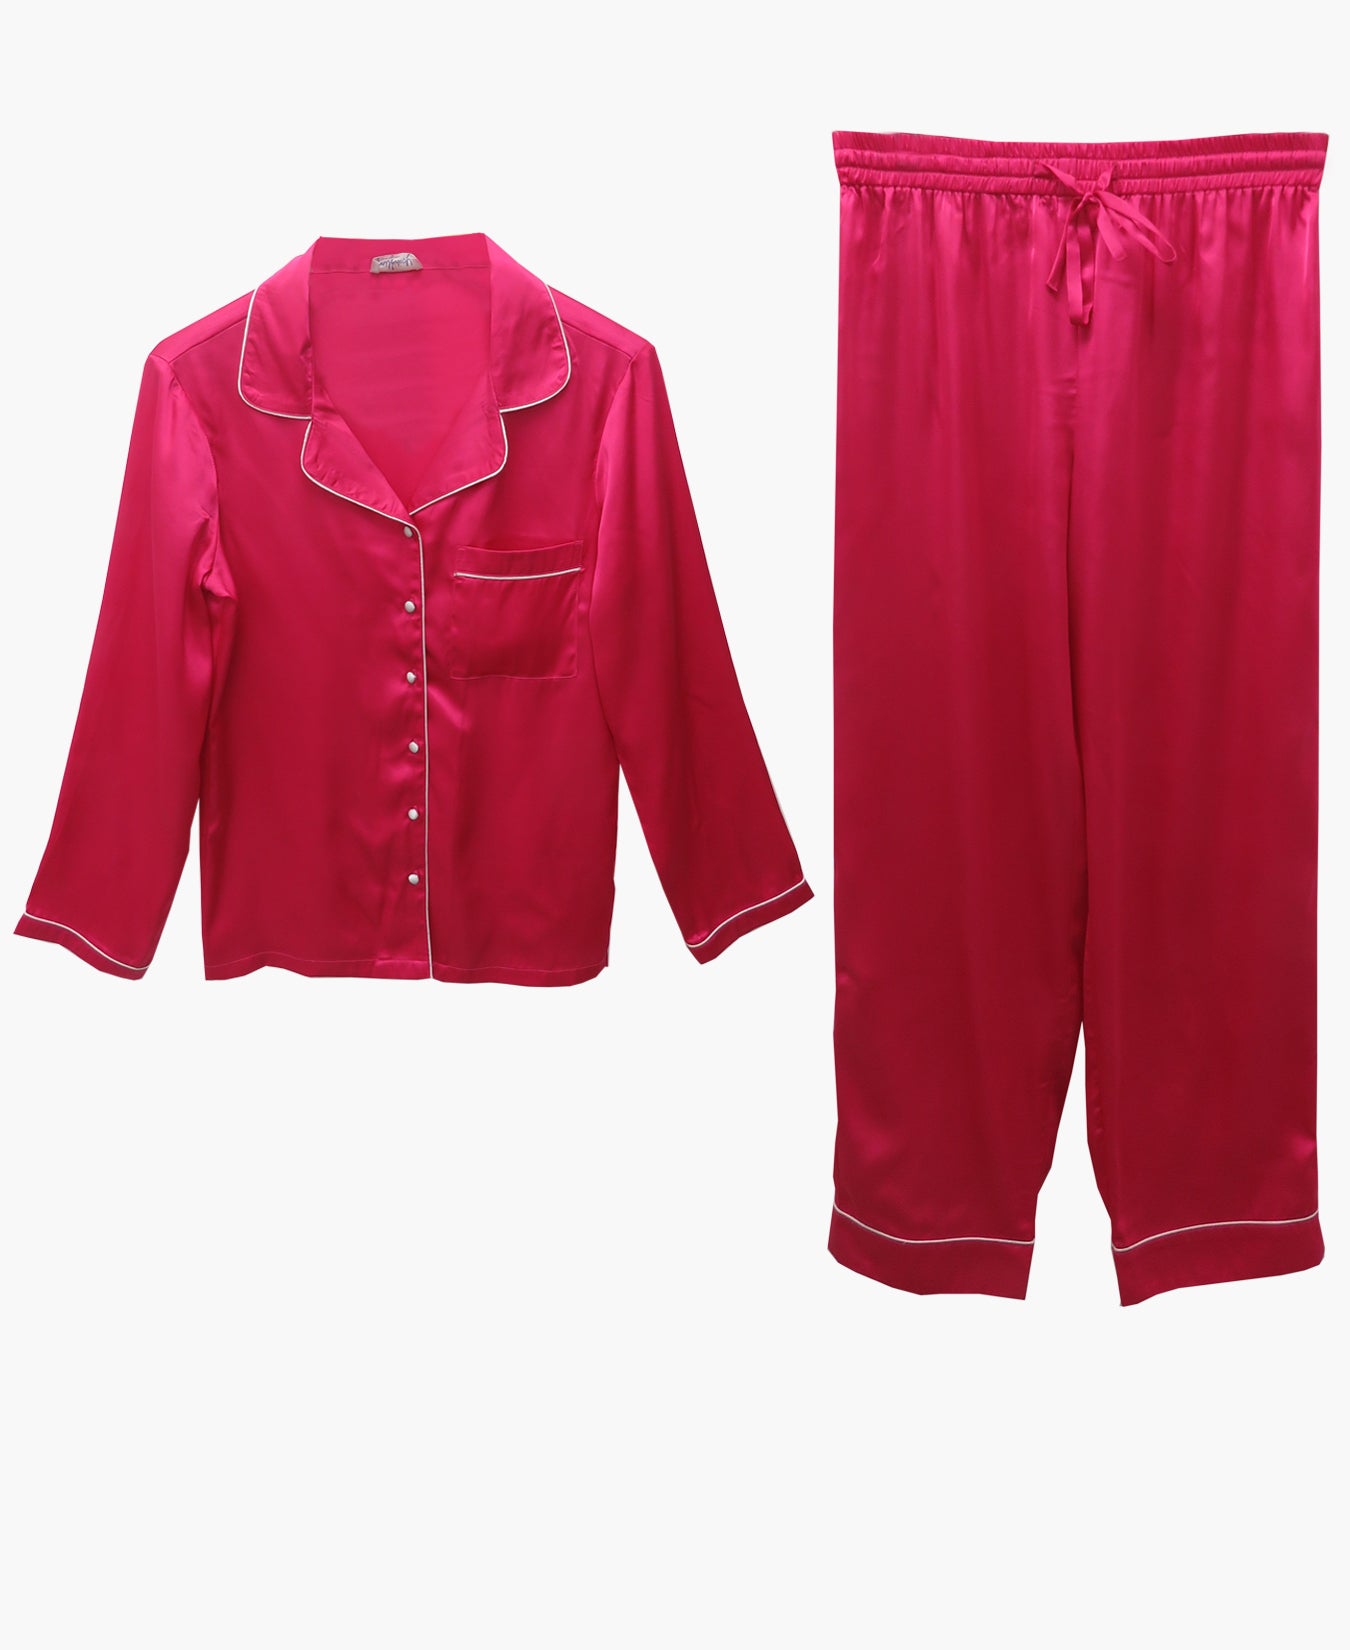 A Glam Pink Satin Night Suit With Full Sleeves, And White Piping.